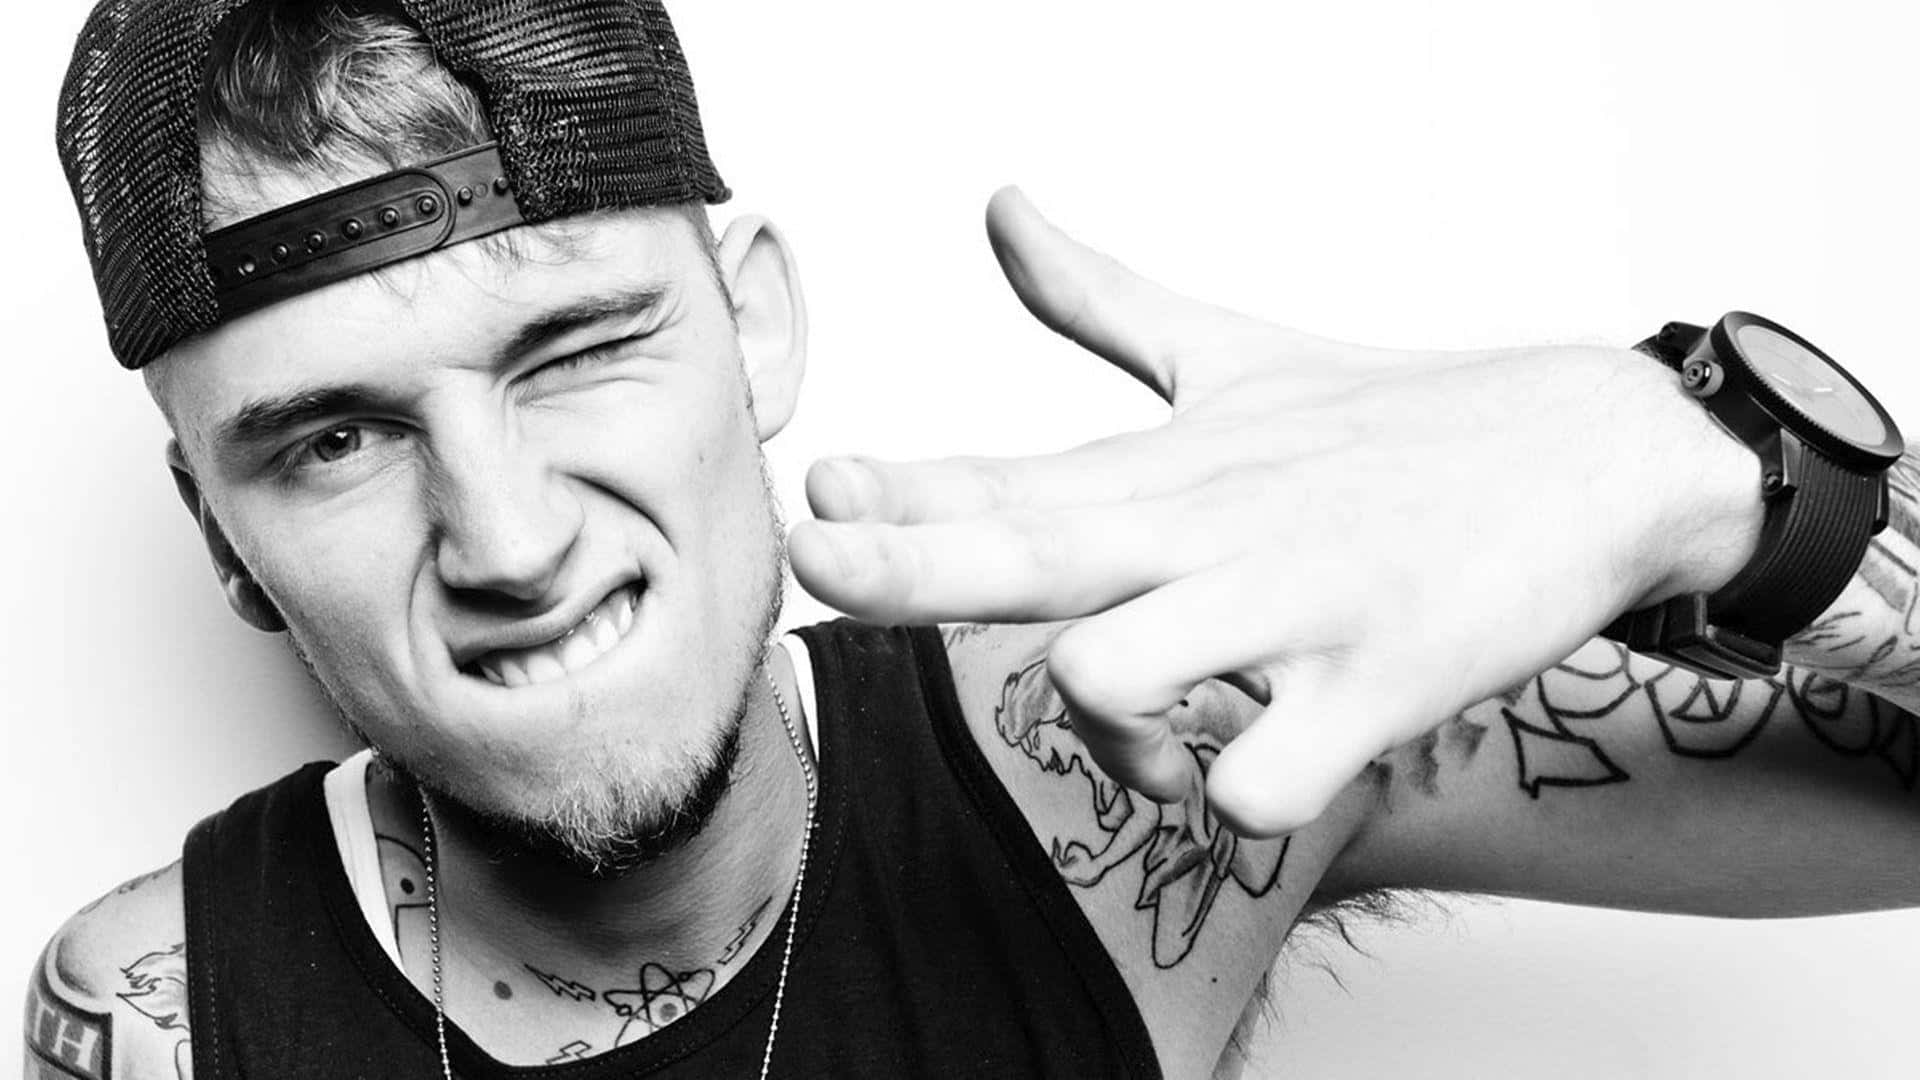 Black-and-white Mgk Background